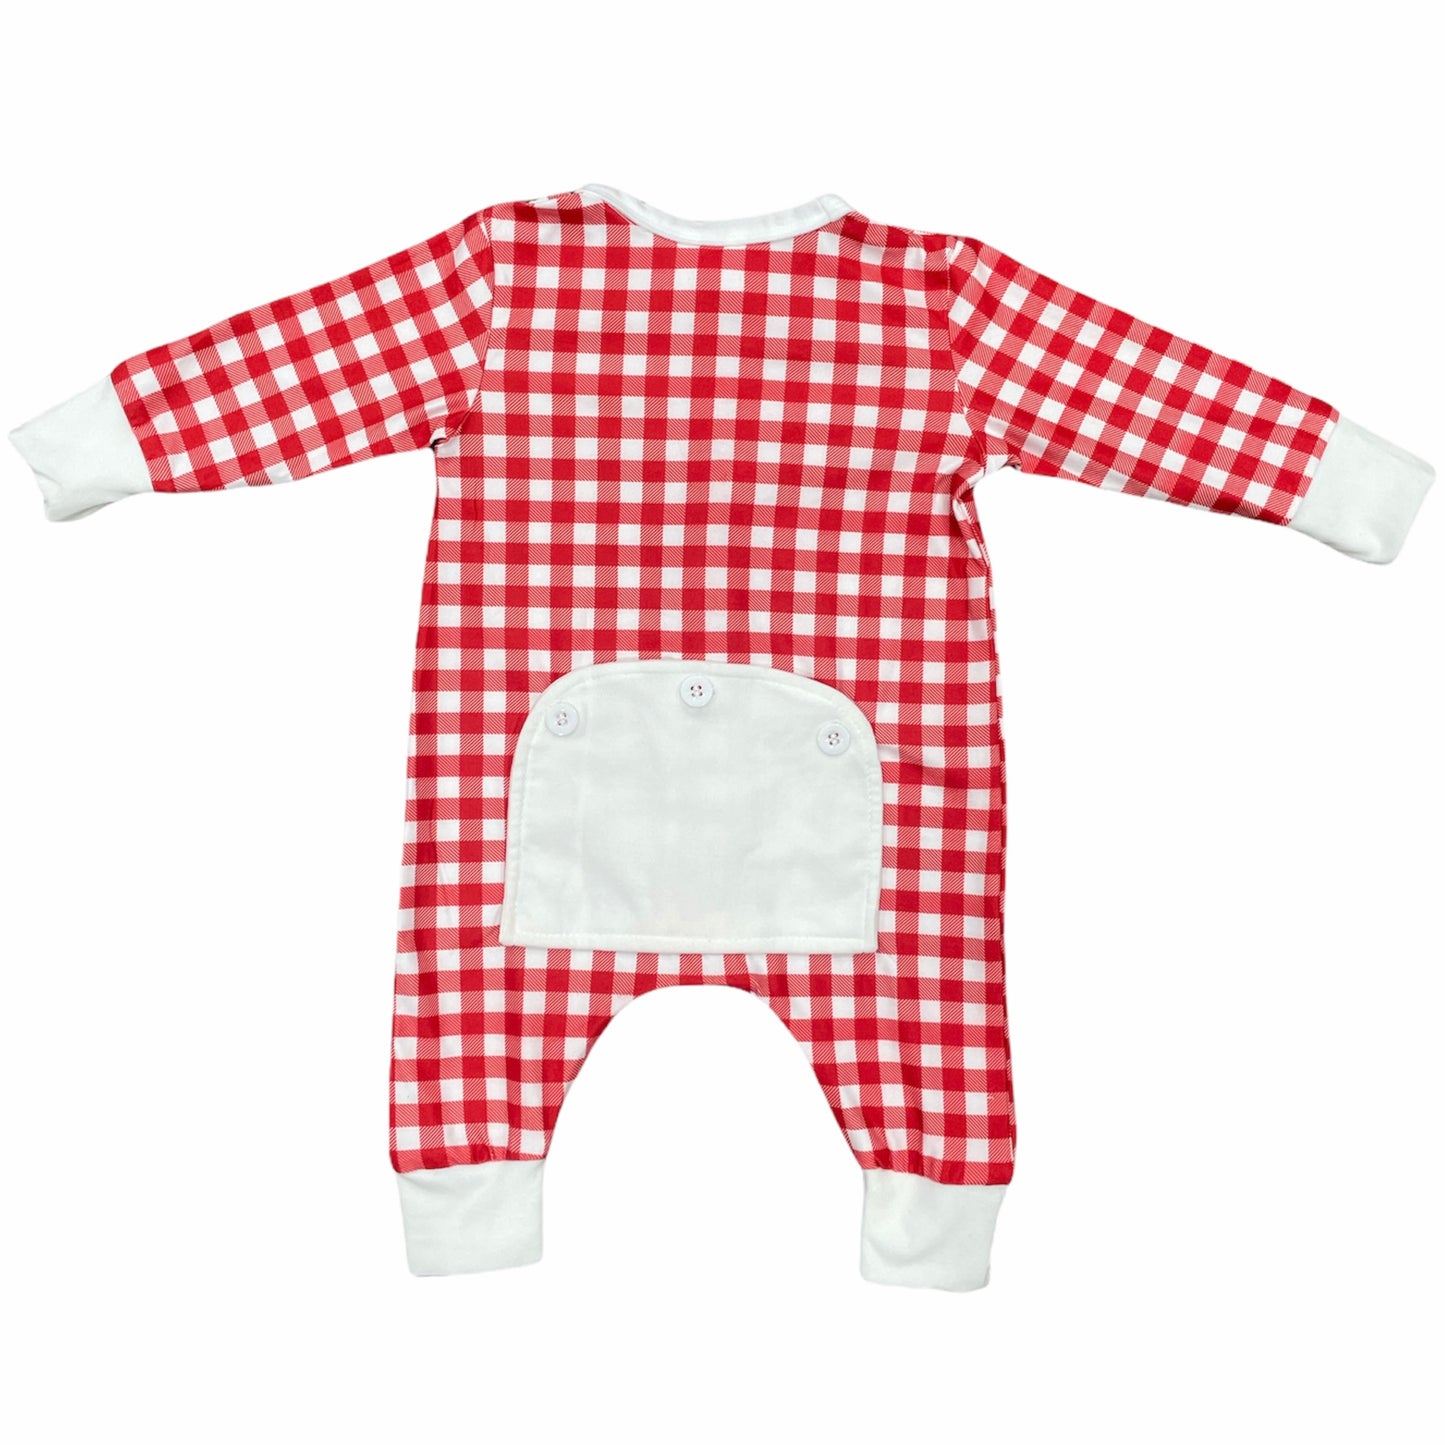 Red Gingham - Buttflap PJs